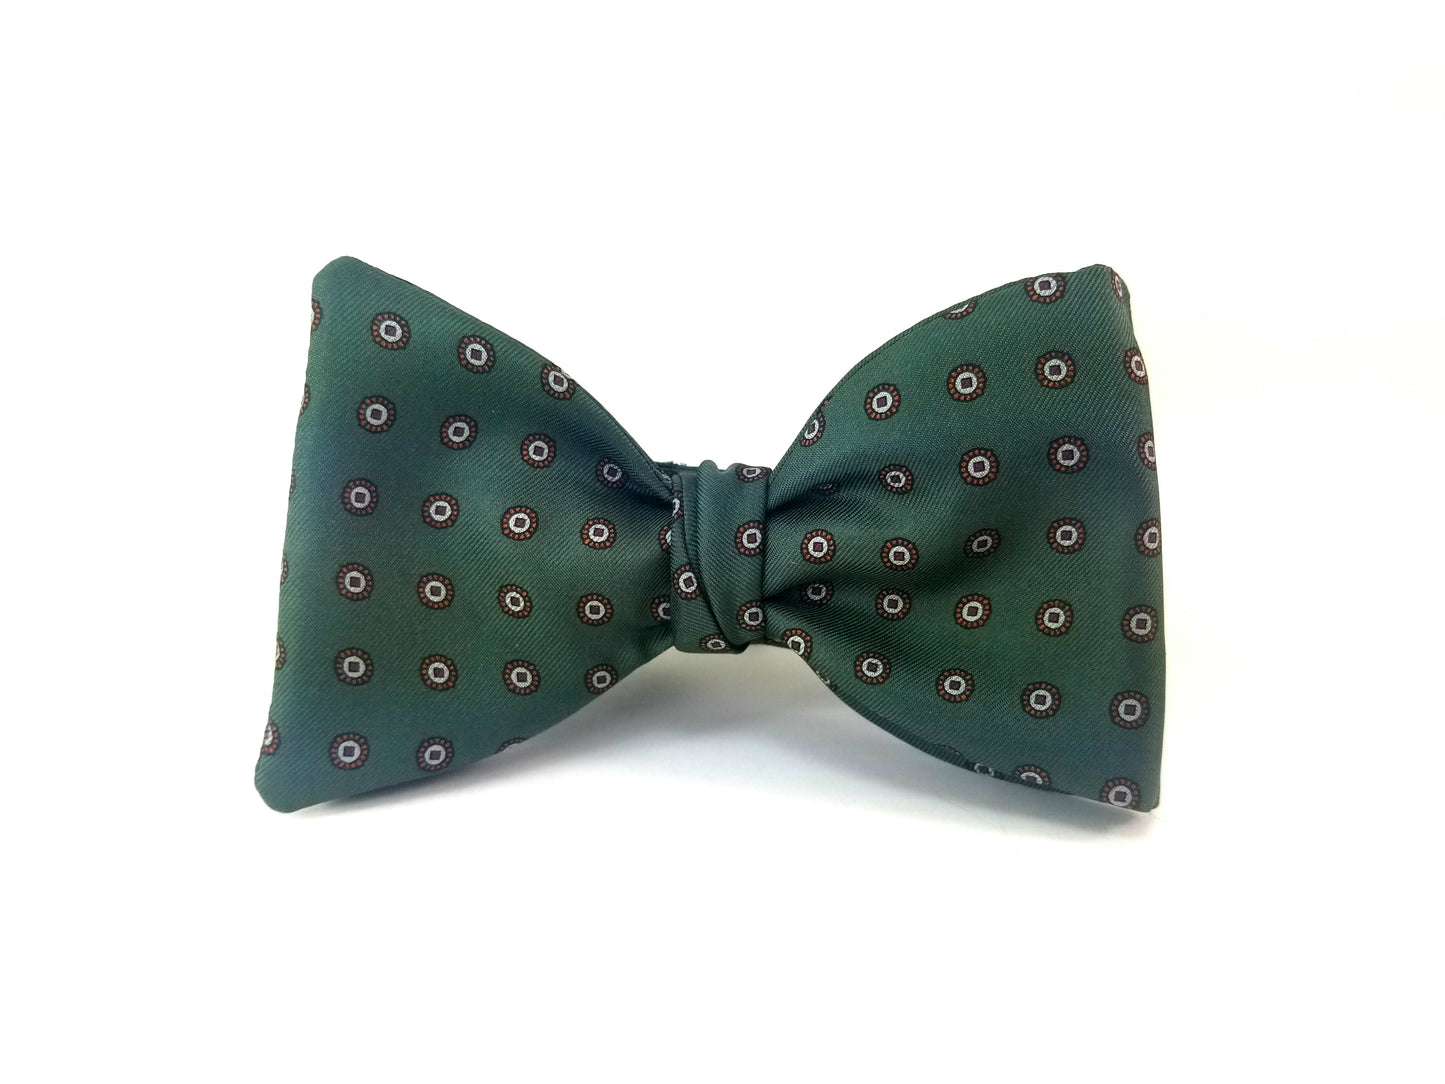 Autumn's Green and Rust Butterfly Bow Tie